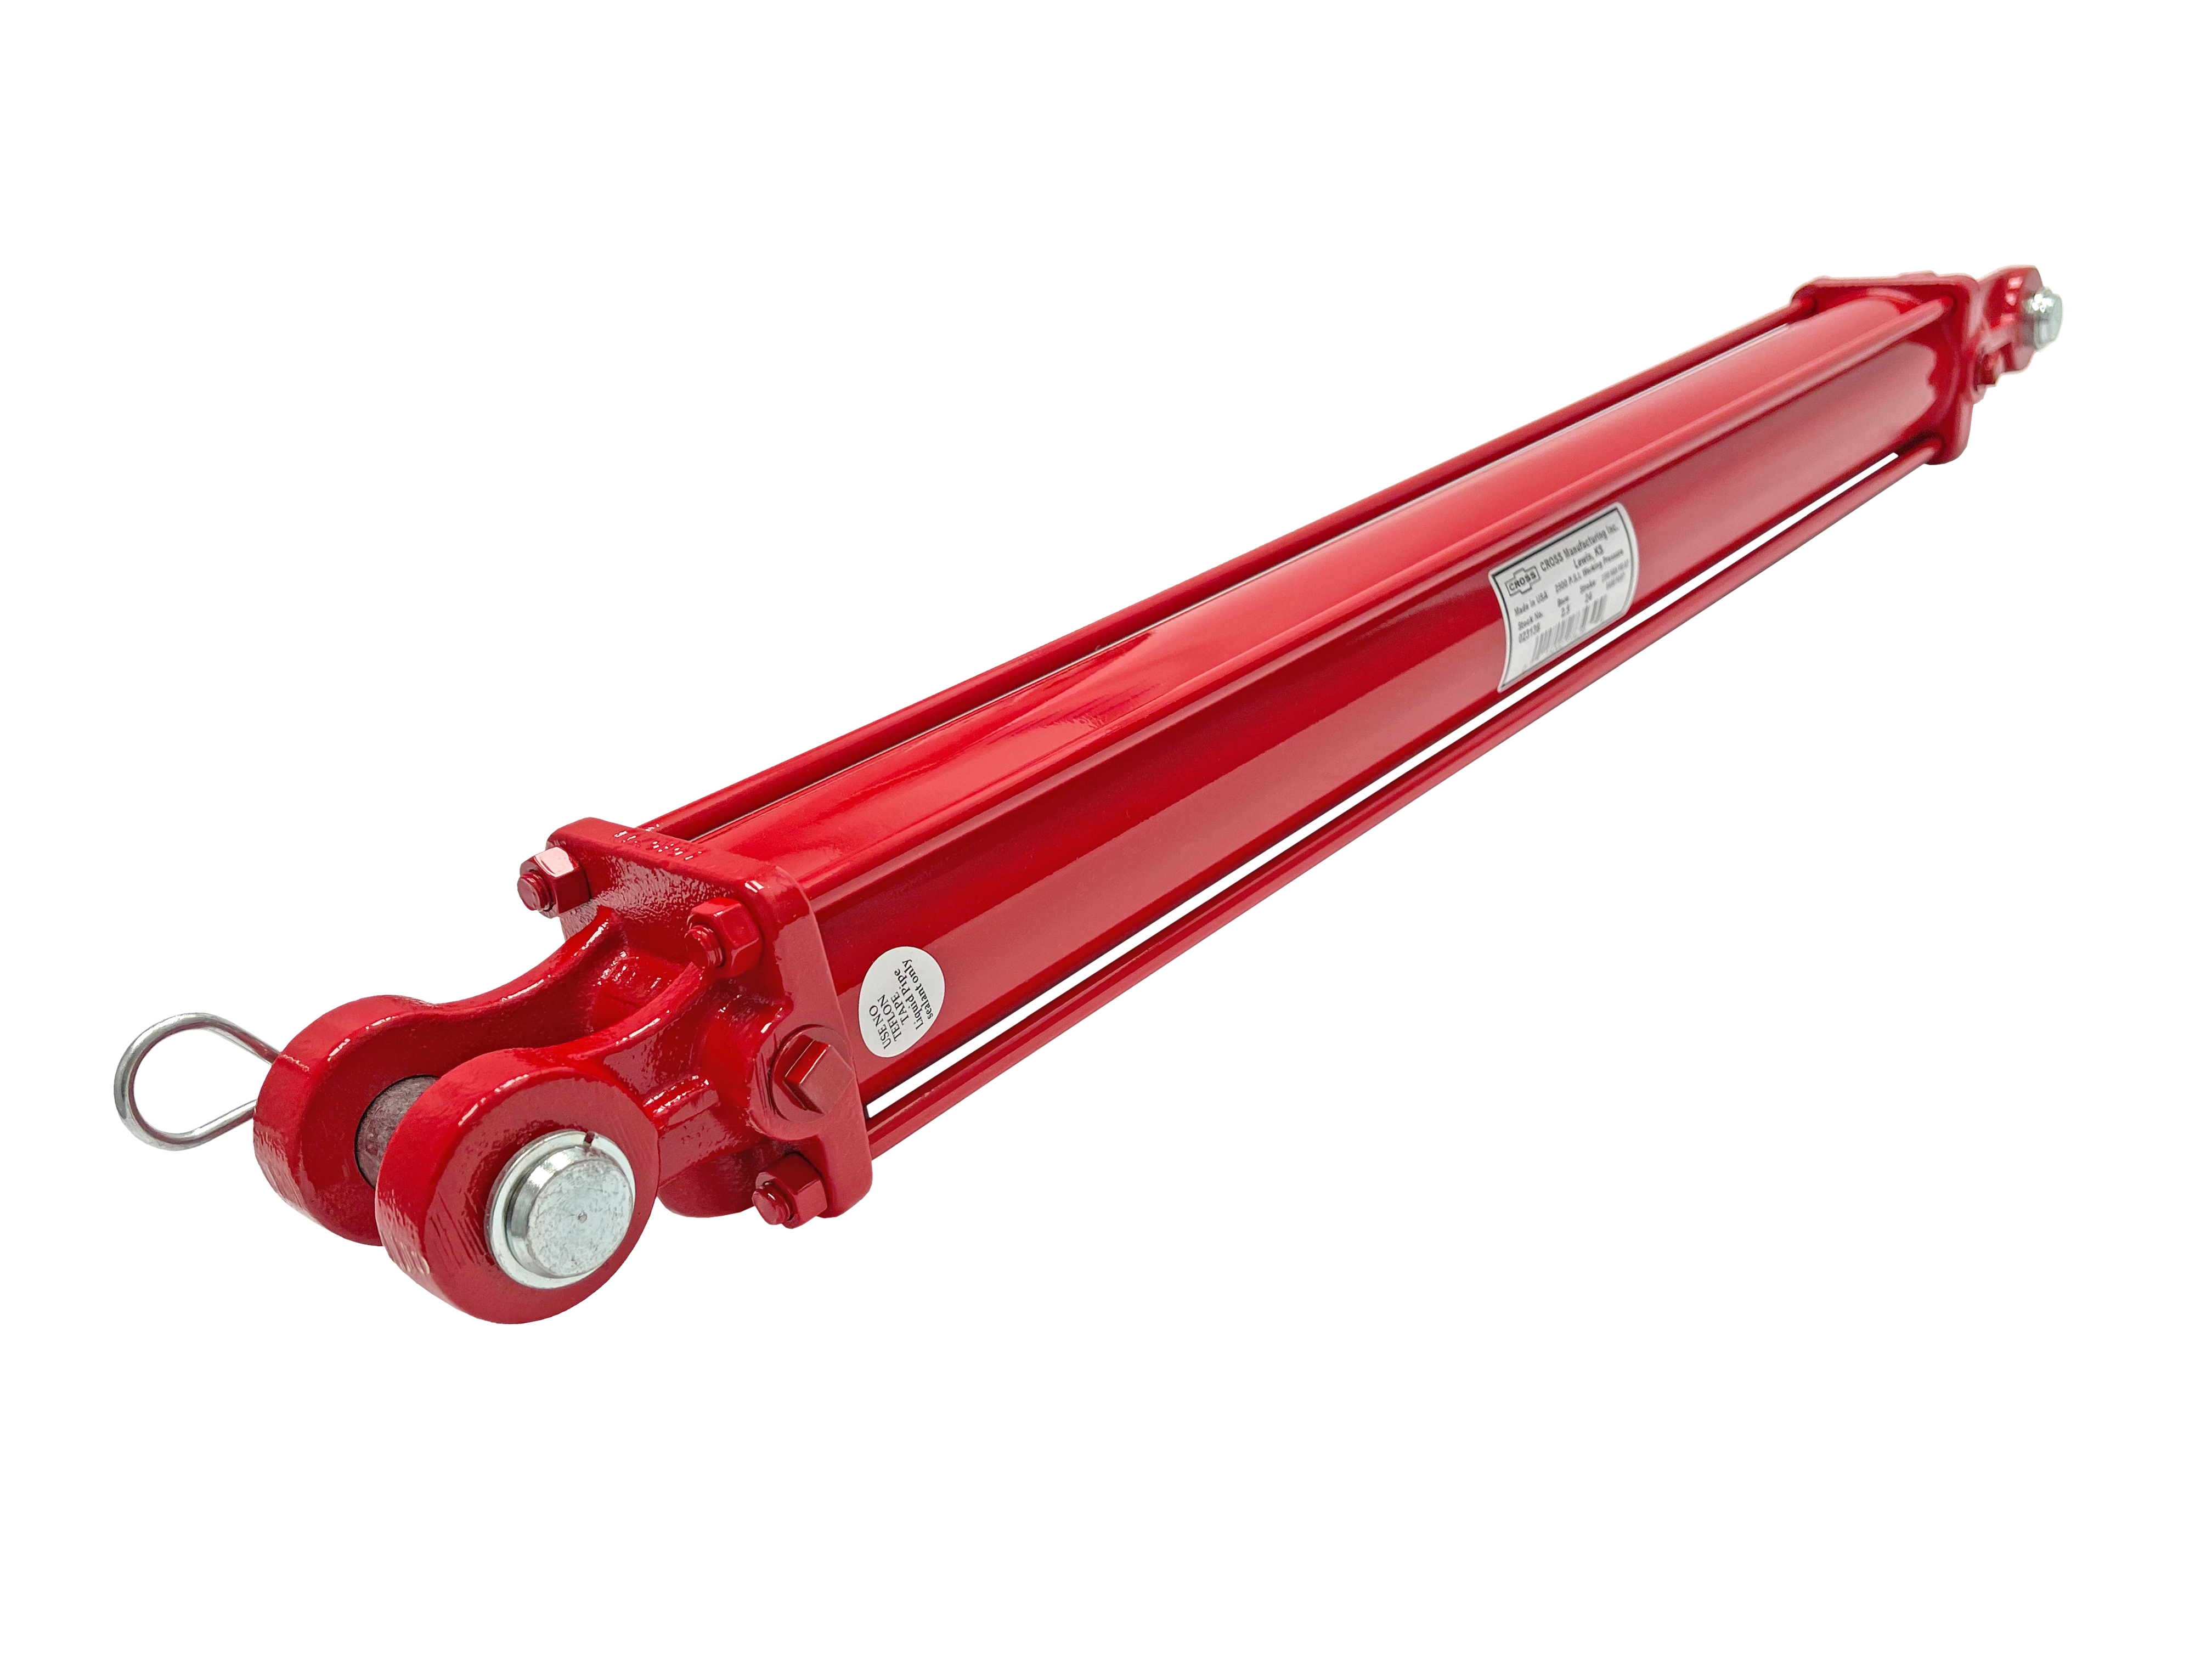 2.5 bore x 28 stroke CROSS hydraulic cylinder, tie rod double acting cylinder DB series | CROSS MANUFACTURING